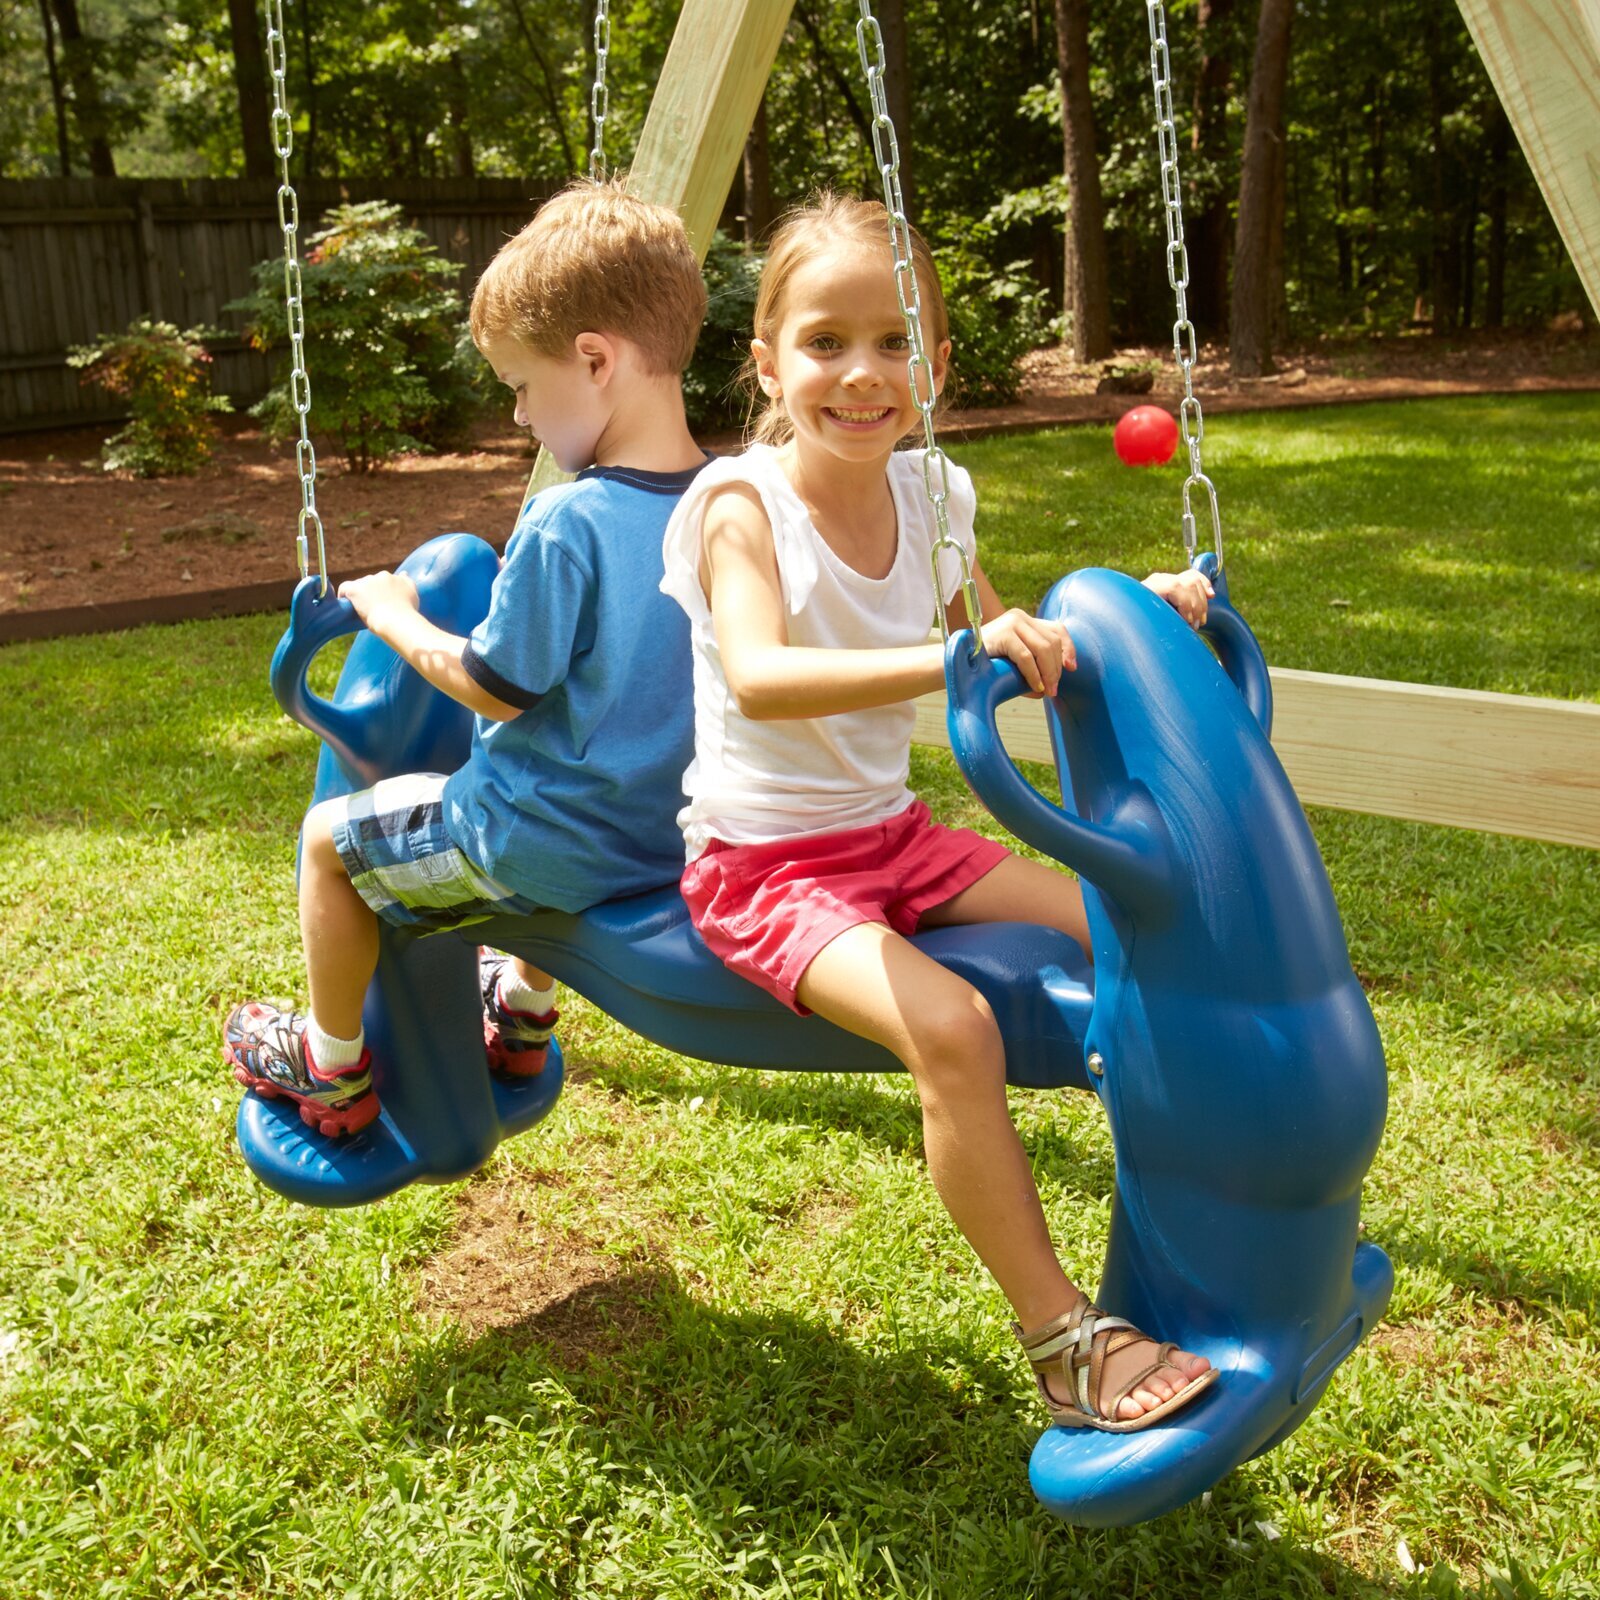 New Childrens Kids Swing Seat Safe Garden Plastic Strong Rope Chair Hook Outdoor